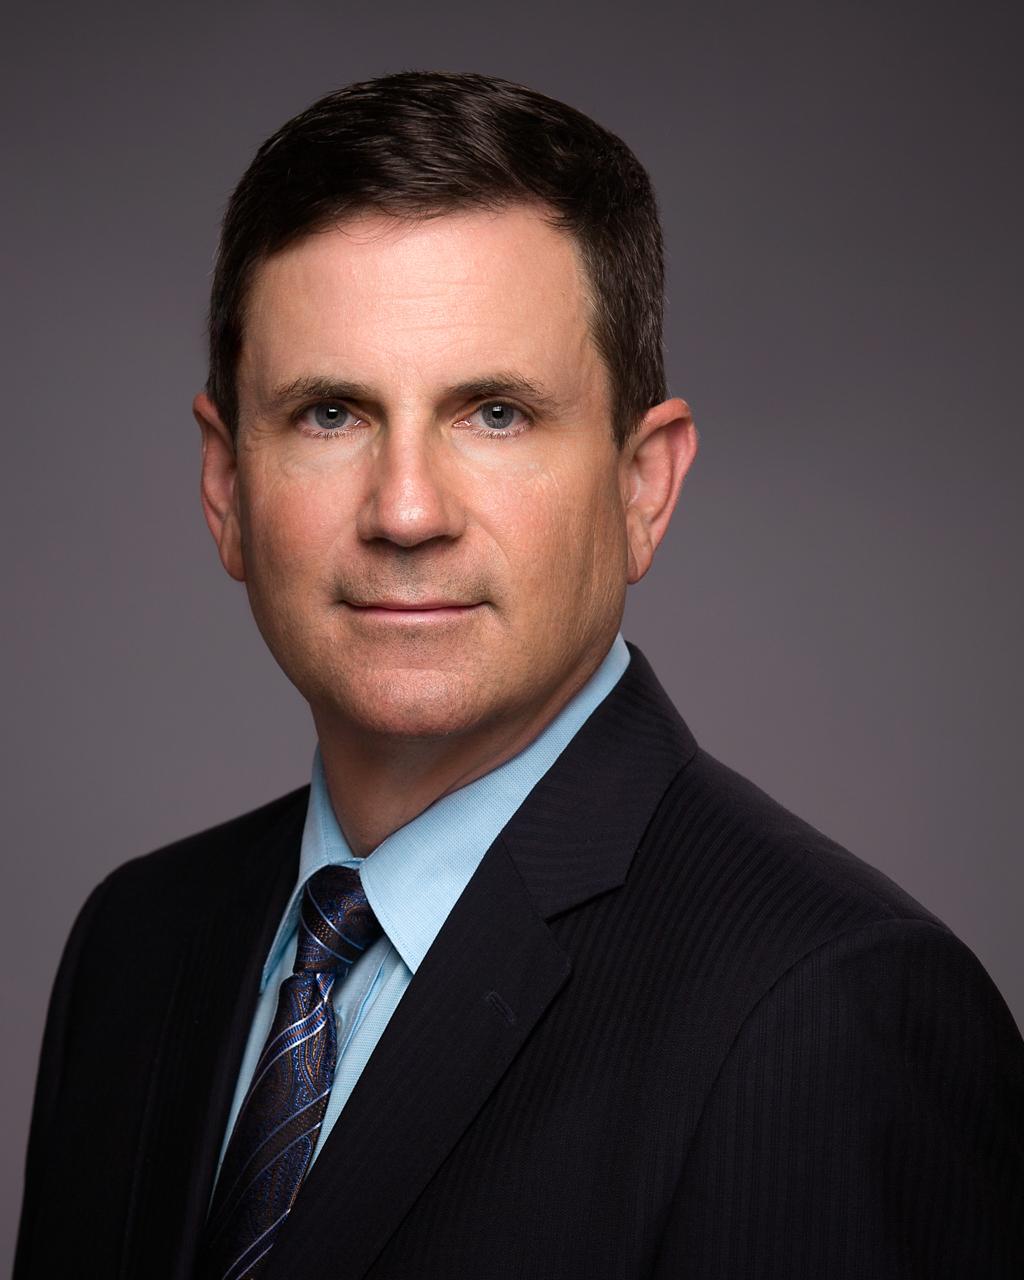 Male professional headshot, suit and tie